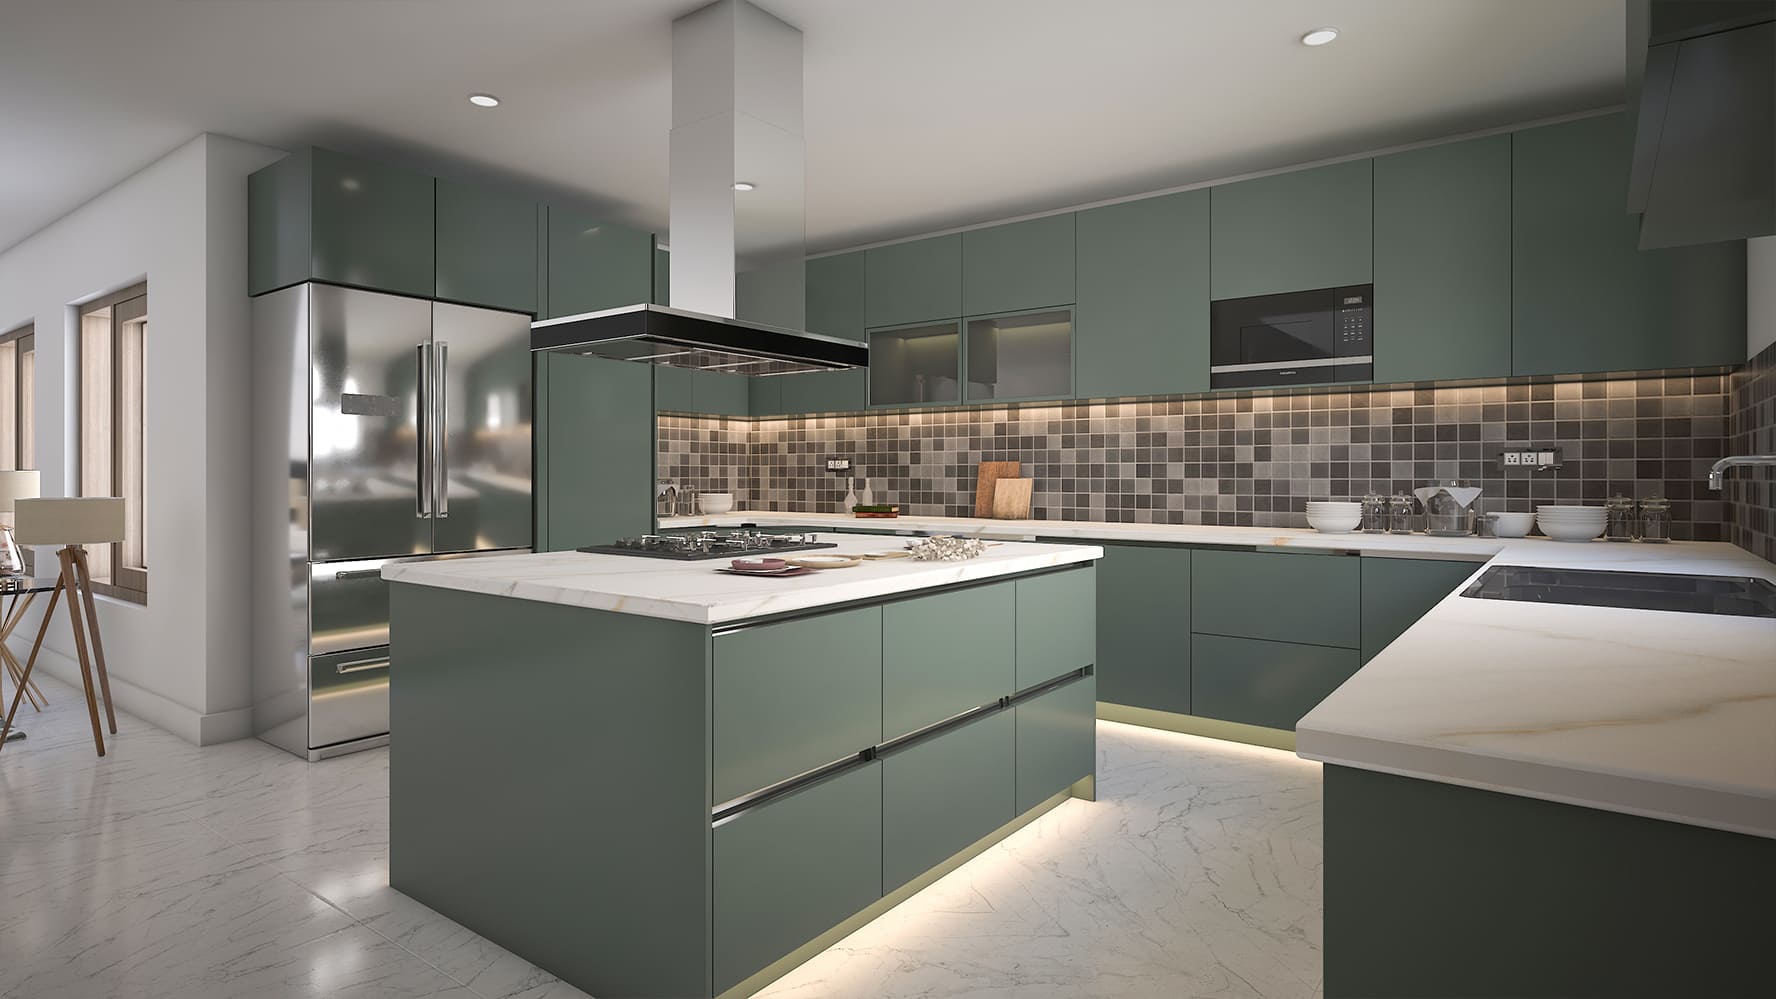 green cooking ،e with a kitchen island, chimney, cabinets and appliances